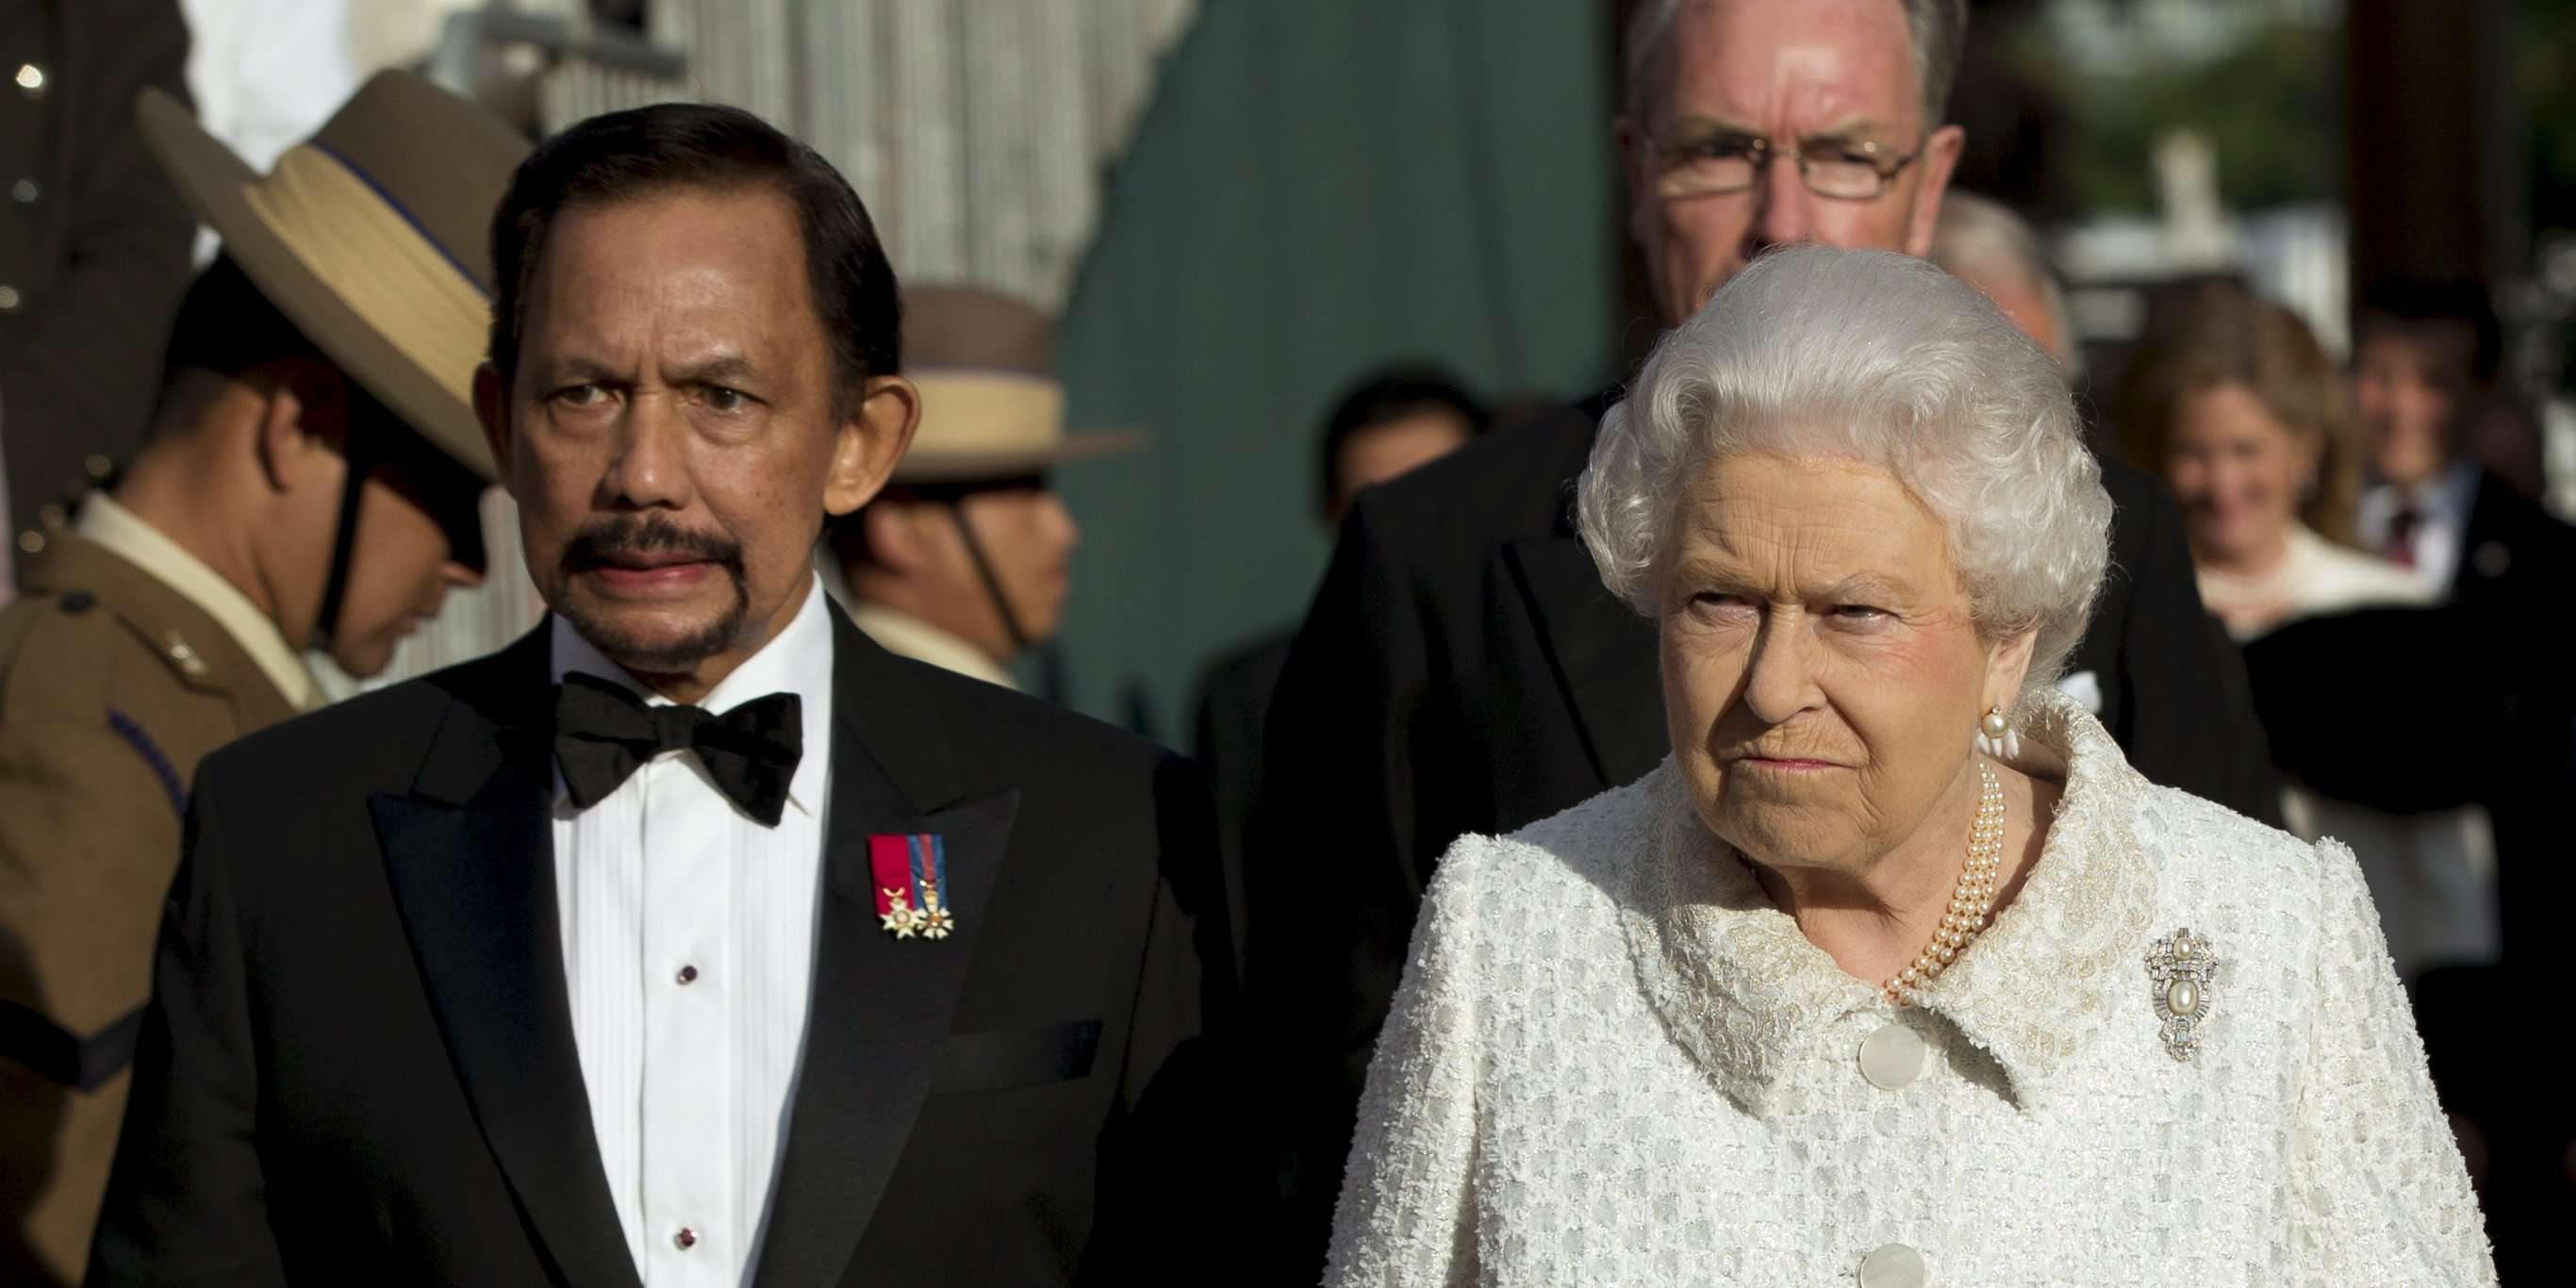 image for British military called on to strip the Sultan of Brunei of honorary appointments awarded to him by the Queen, as backlash against new anti-LGBT laws grows